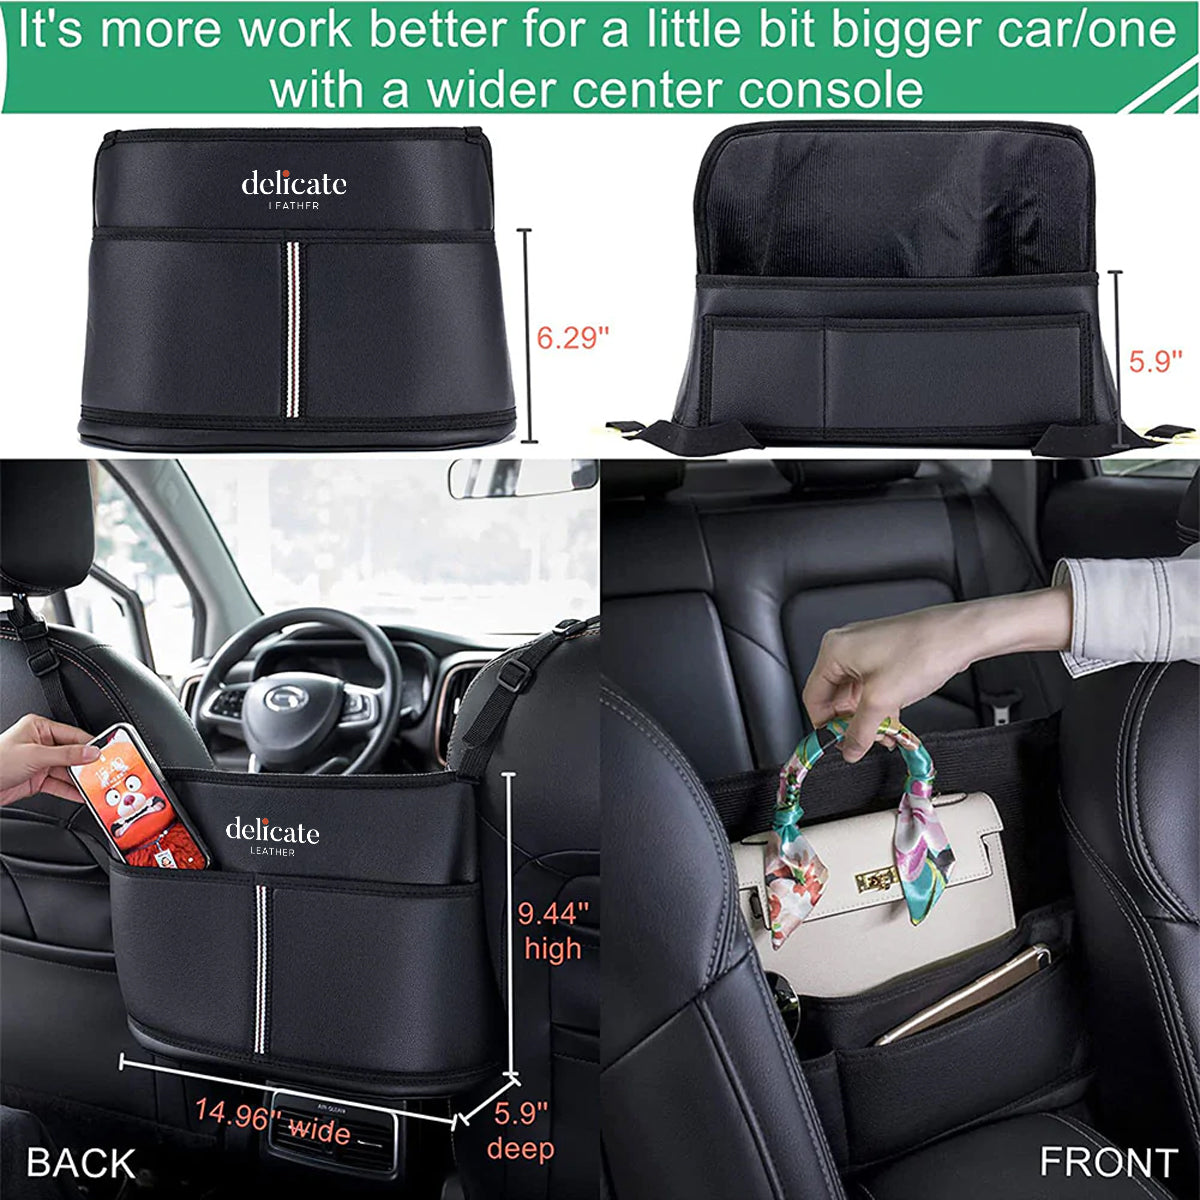 Delicate Leather Car Purse Holder for Car Handbag Holder Between Seats Premium PU Leather, Custom Fit For Your Car, Auto Driver Or Passenger Accessories Organizer, Hanging Car Purse Storage Pocket Back Seat Pet Barrier LM11991 - Delicate Leather